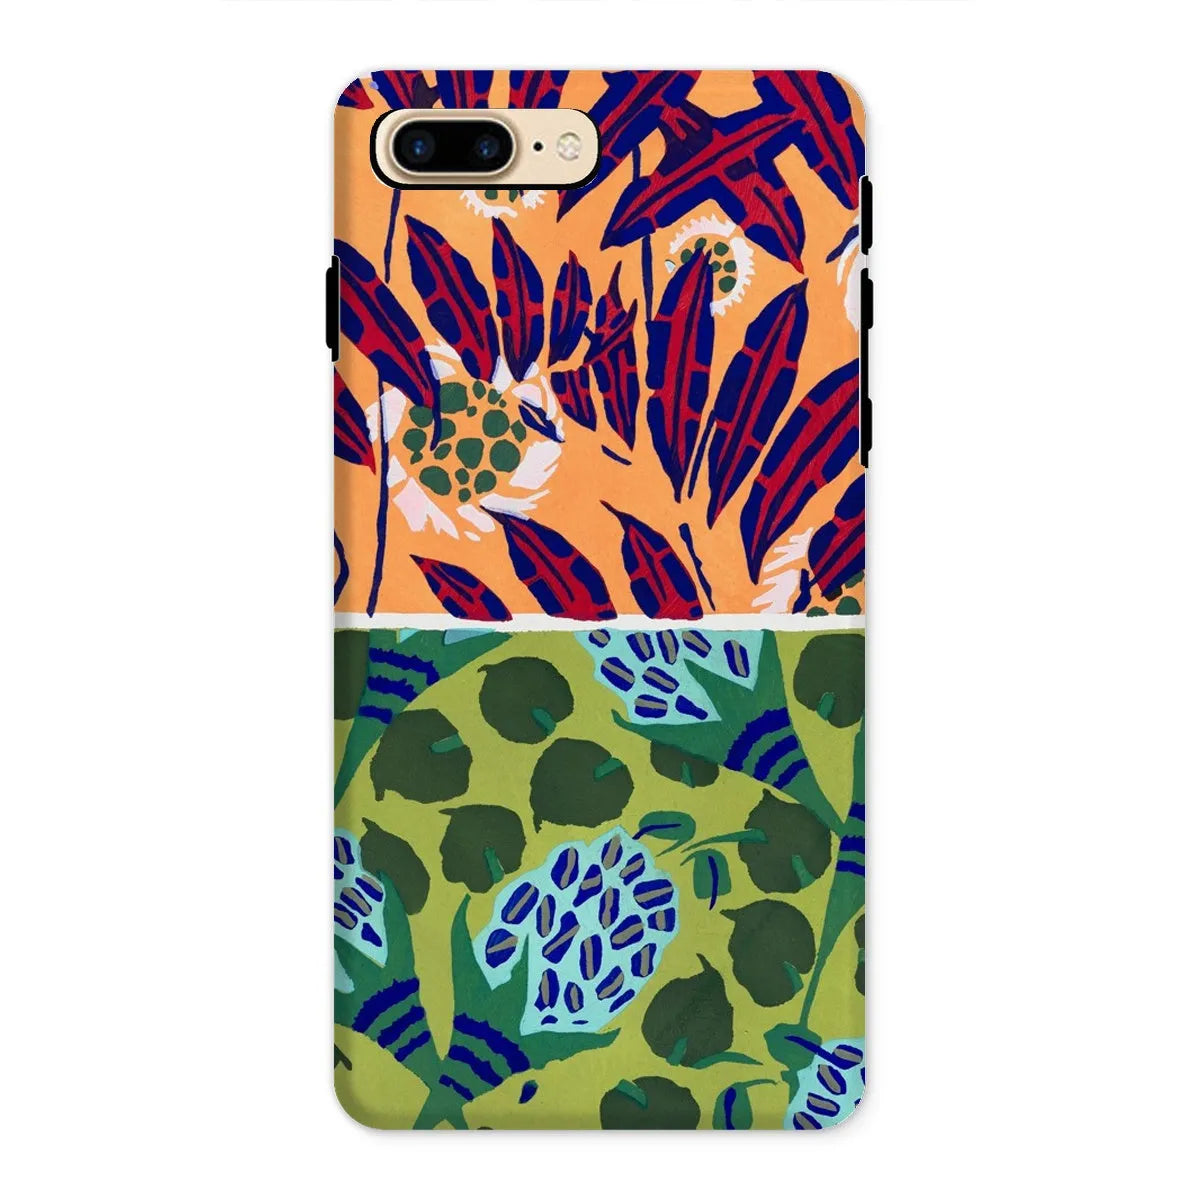 Fabric & Rugs Too - Pochoir Pattern Phone Case - E. A. Séguy - Iphone 8 Plus / Matte - Mobile Phone Cases - Aesthetic